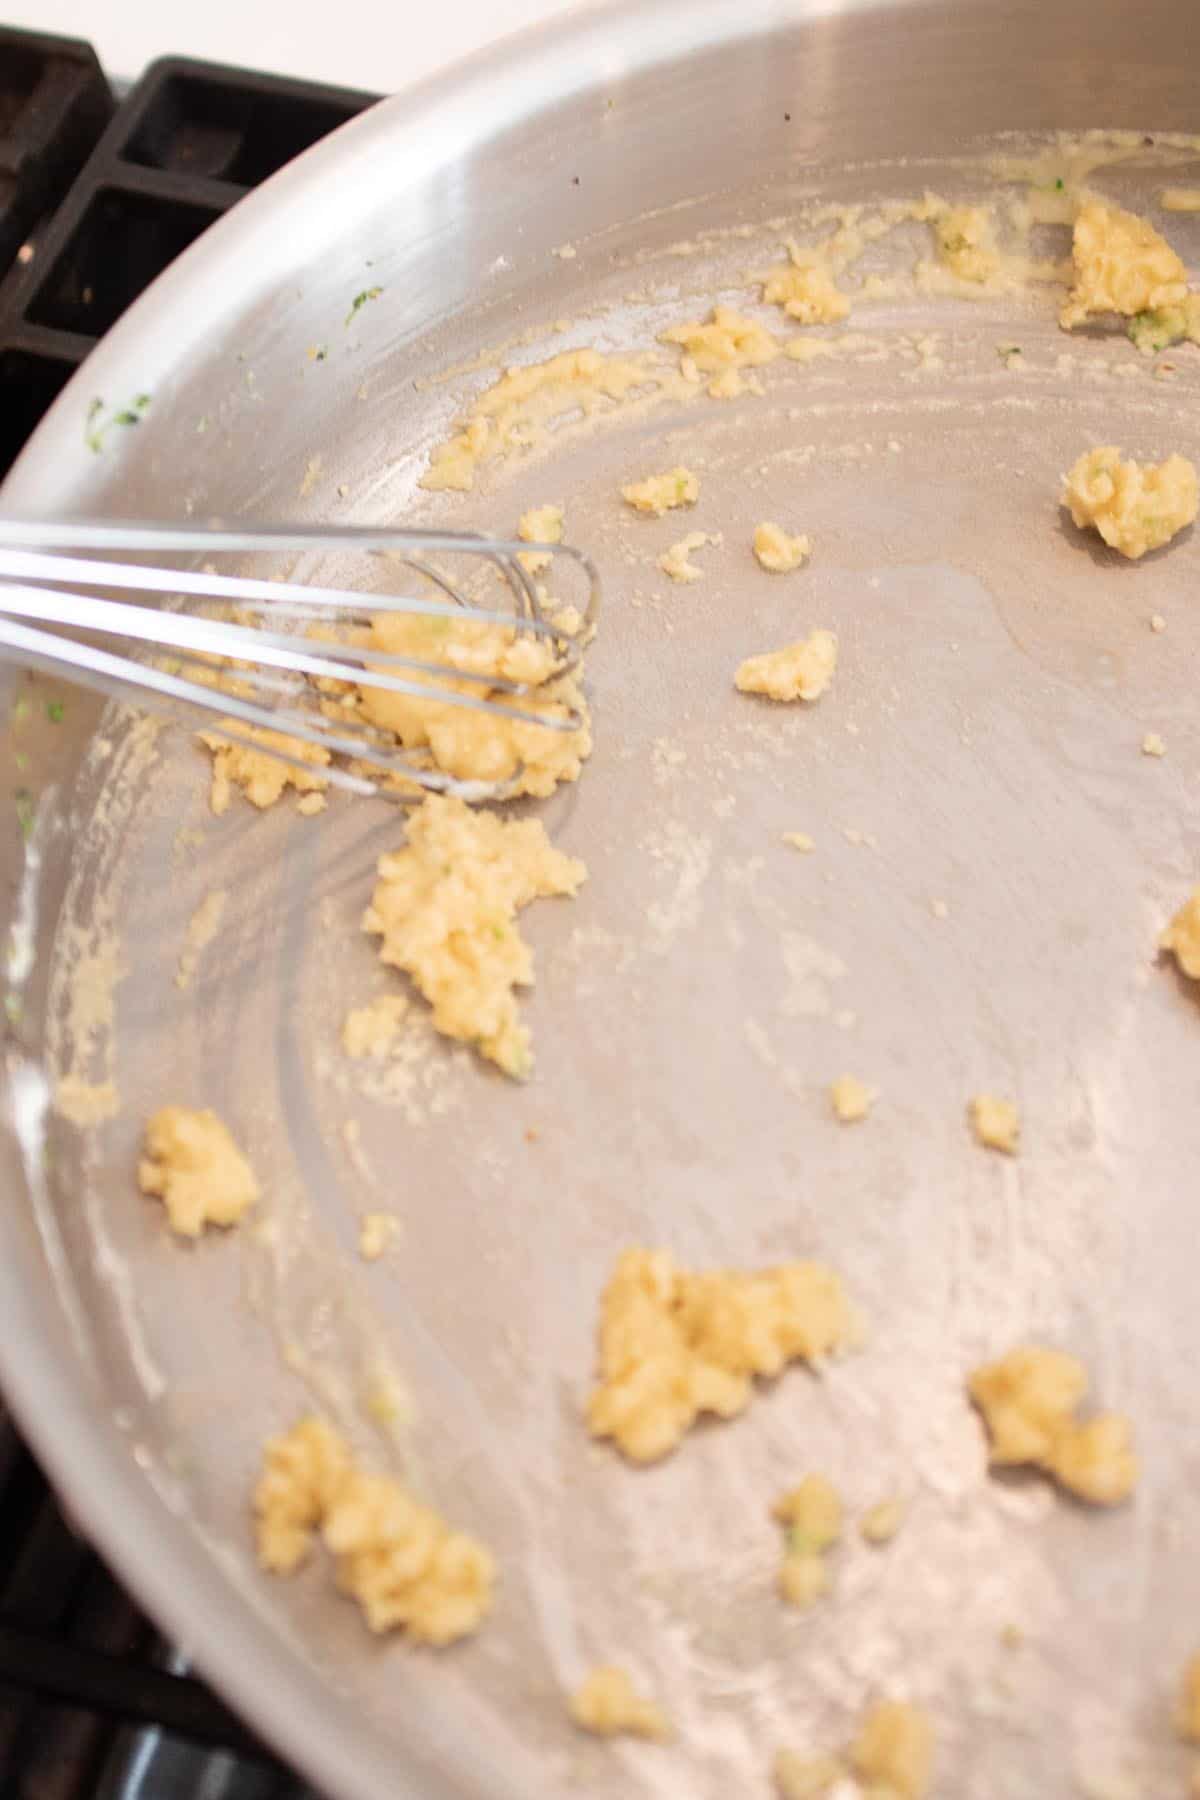 A sauce pan with clumps of flour and butter being mixed with a whisk.